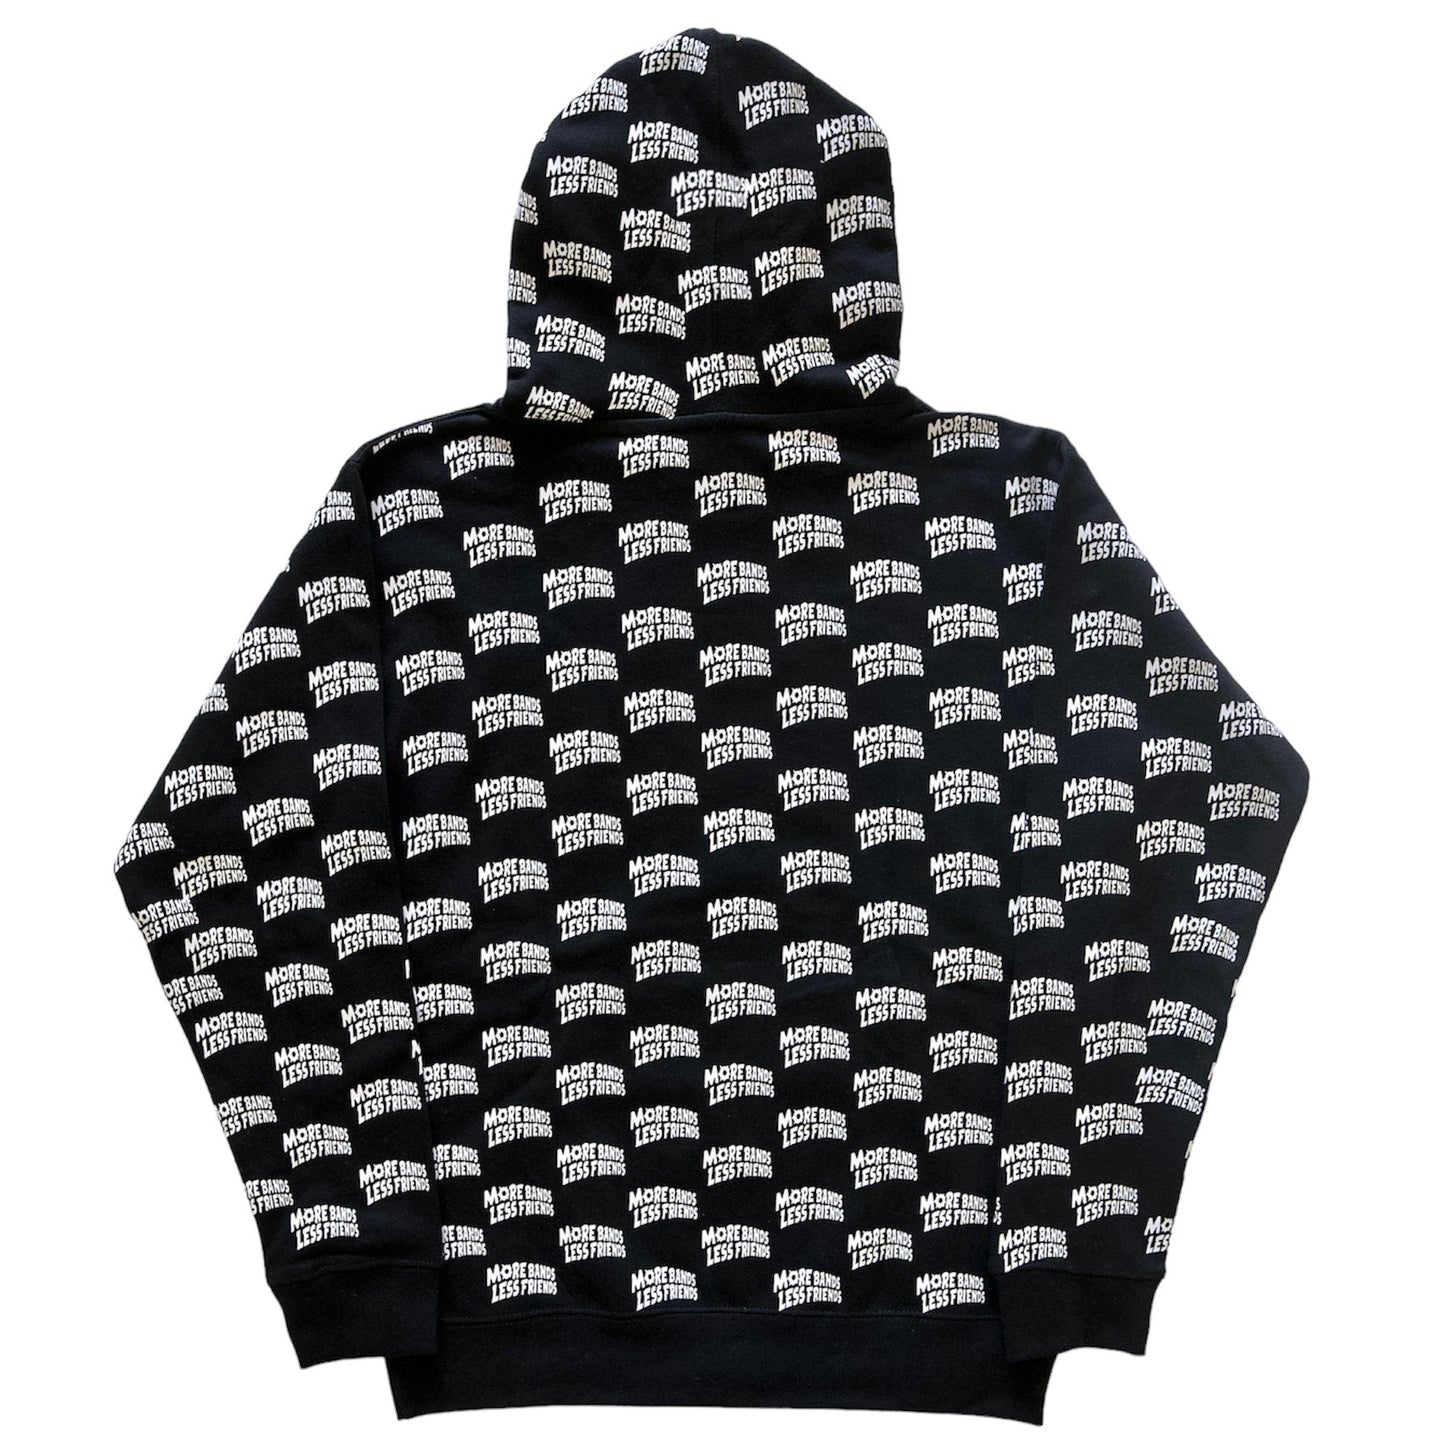 Black All-Over Print “More Bands Less Friends” Hoodie